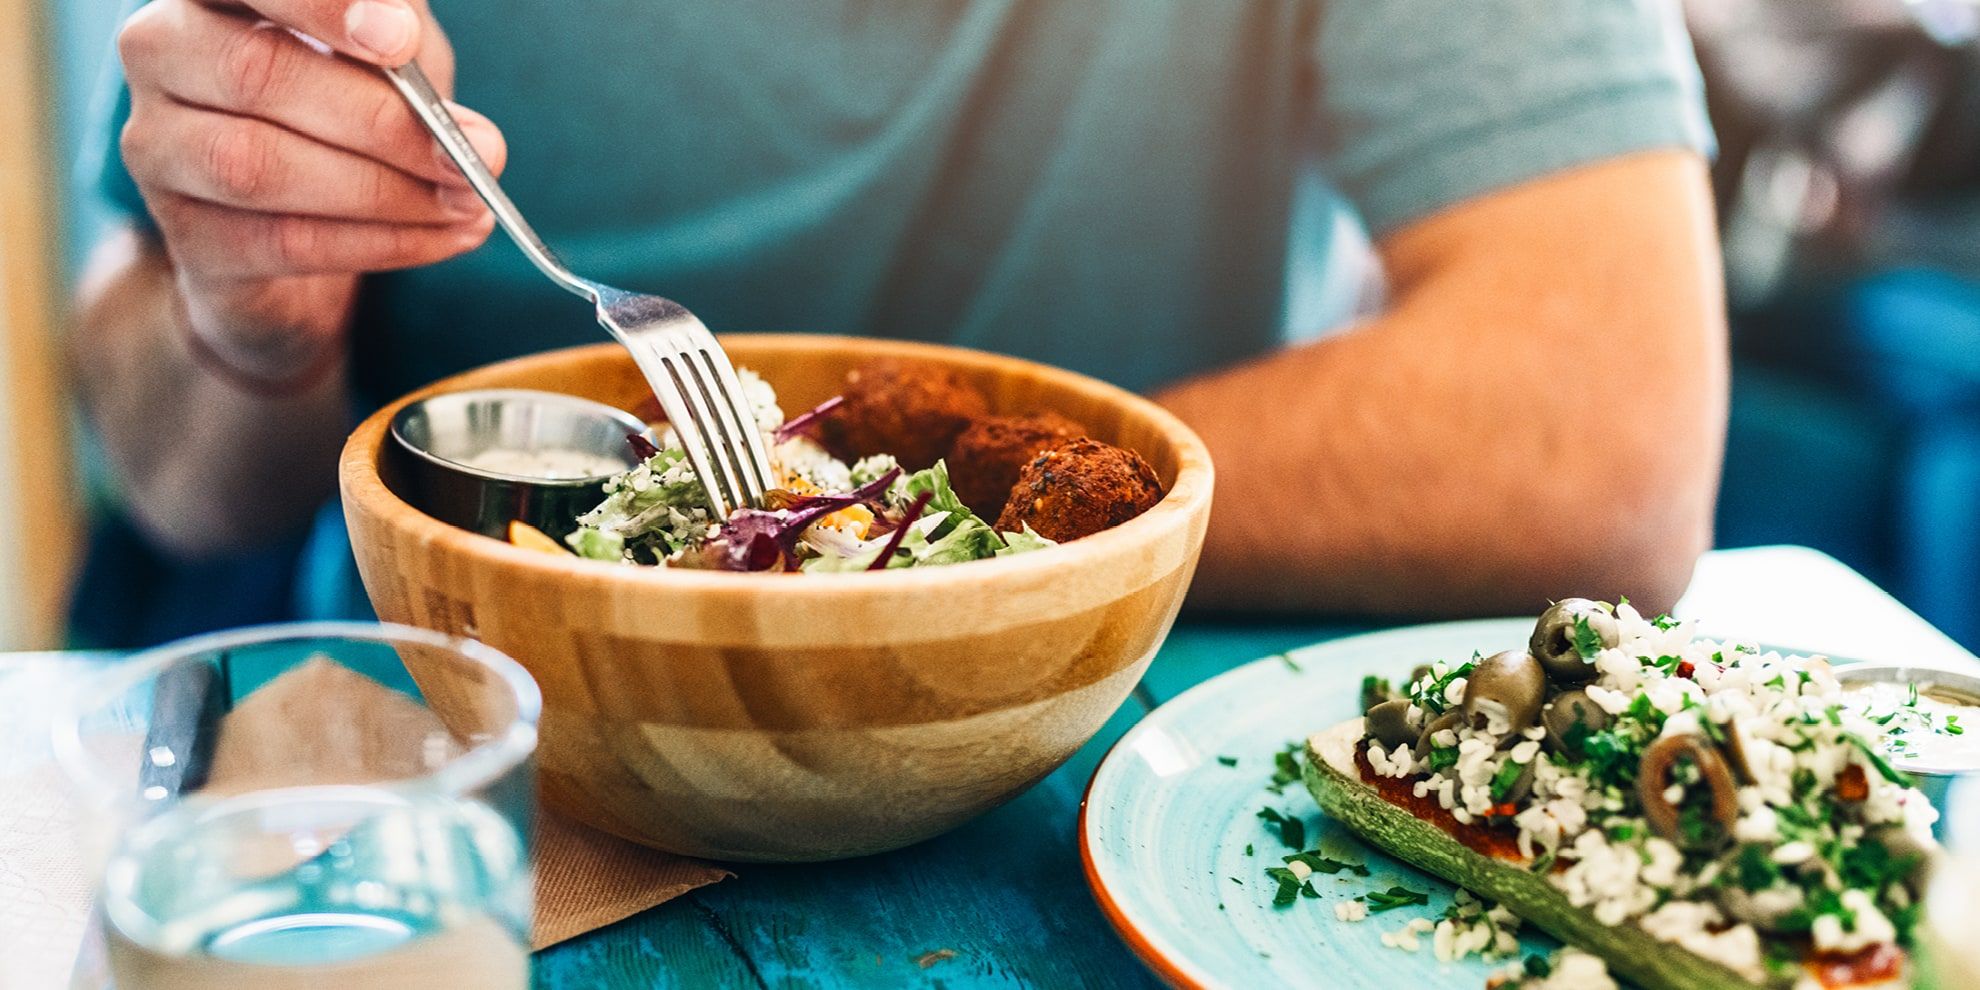 How to build a sustainable diet | Tips and information – FutureLearn